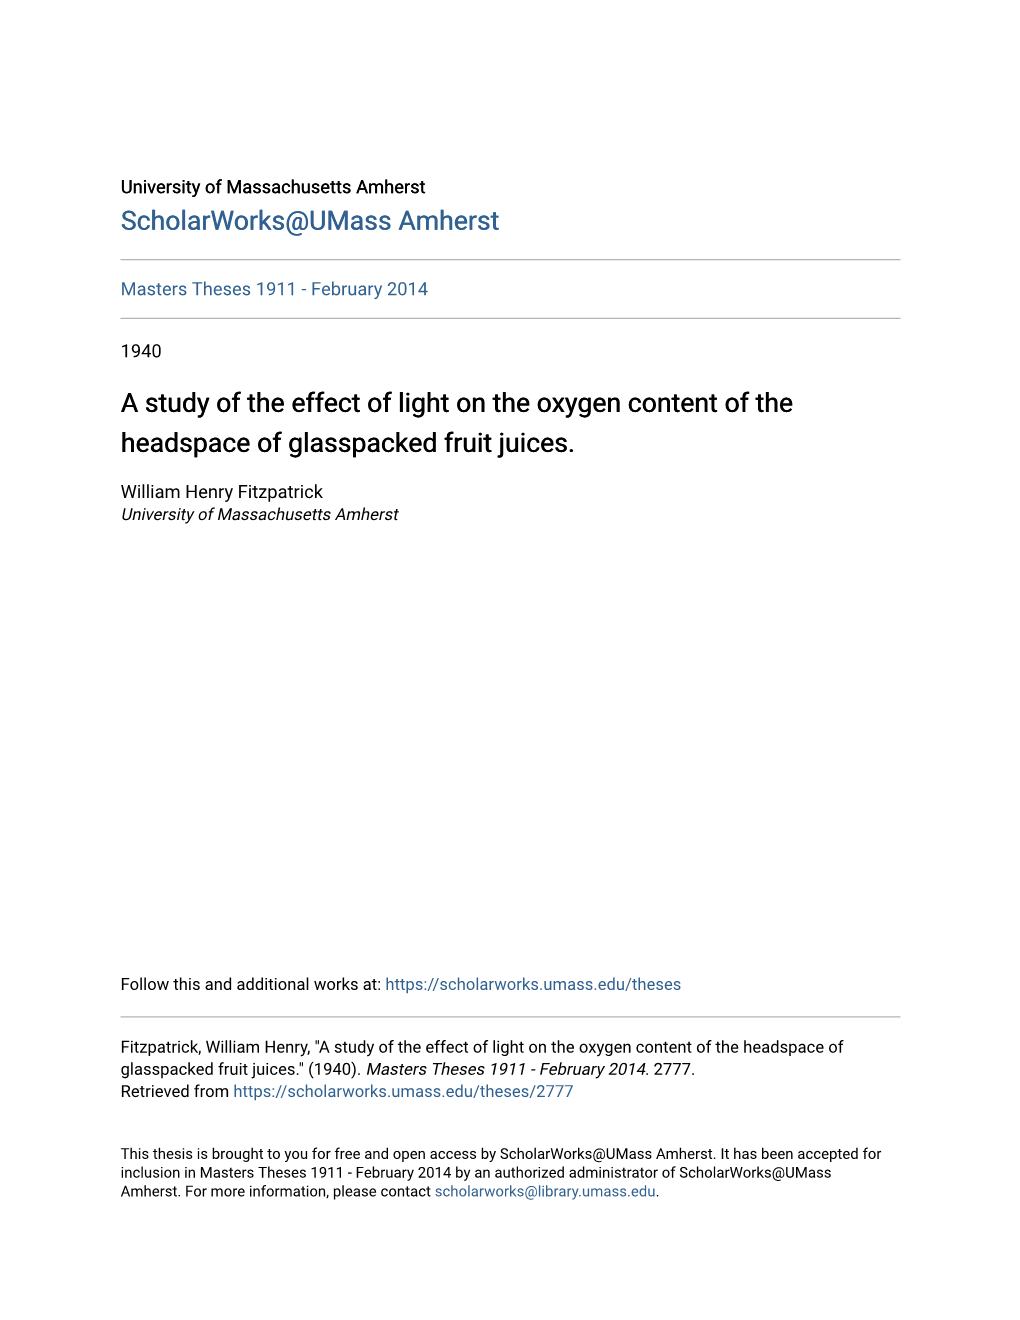 A Study of the Effect of Light on the Oxygen Content of the Headspace of Glasspacked Fruit Juices